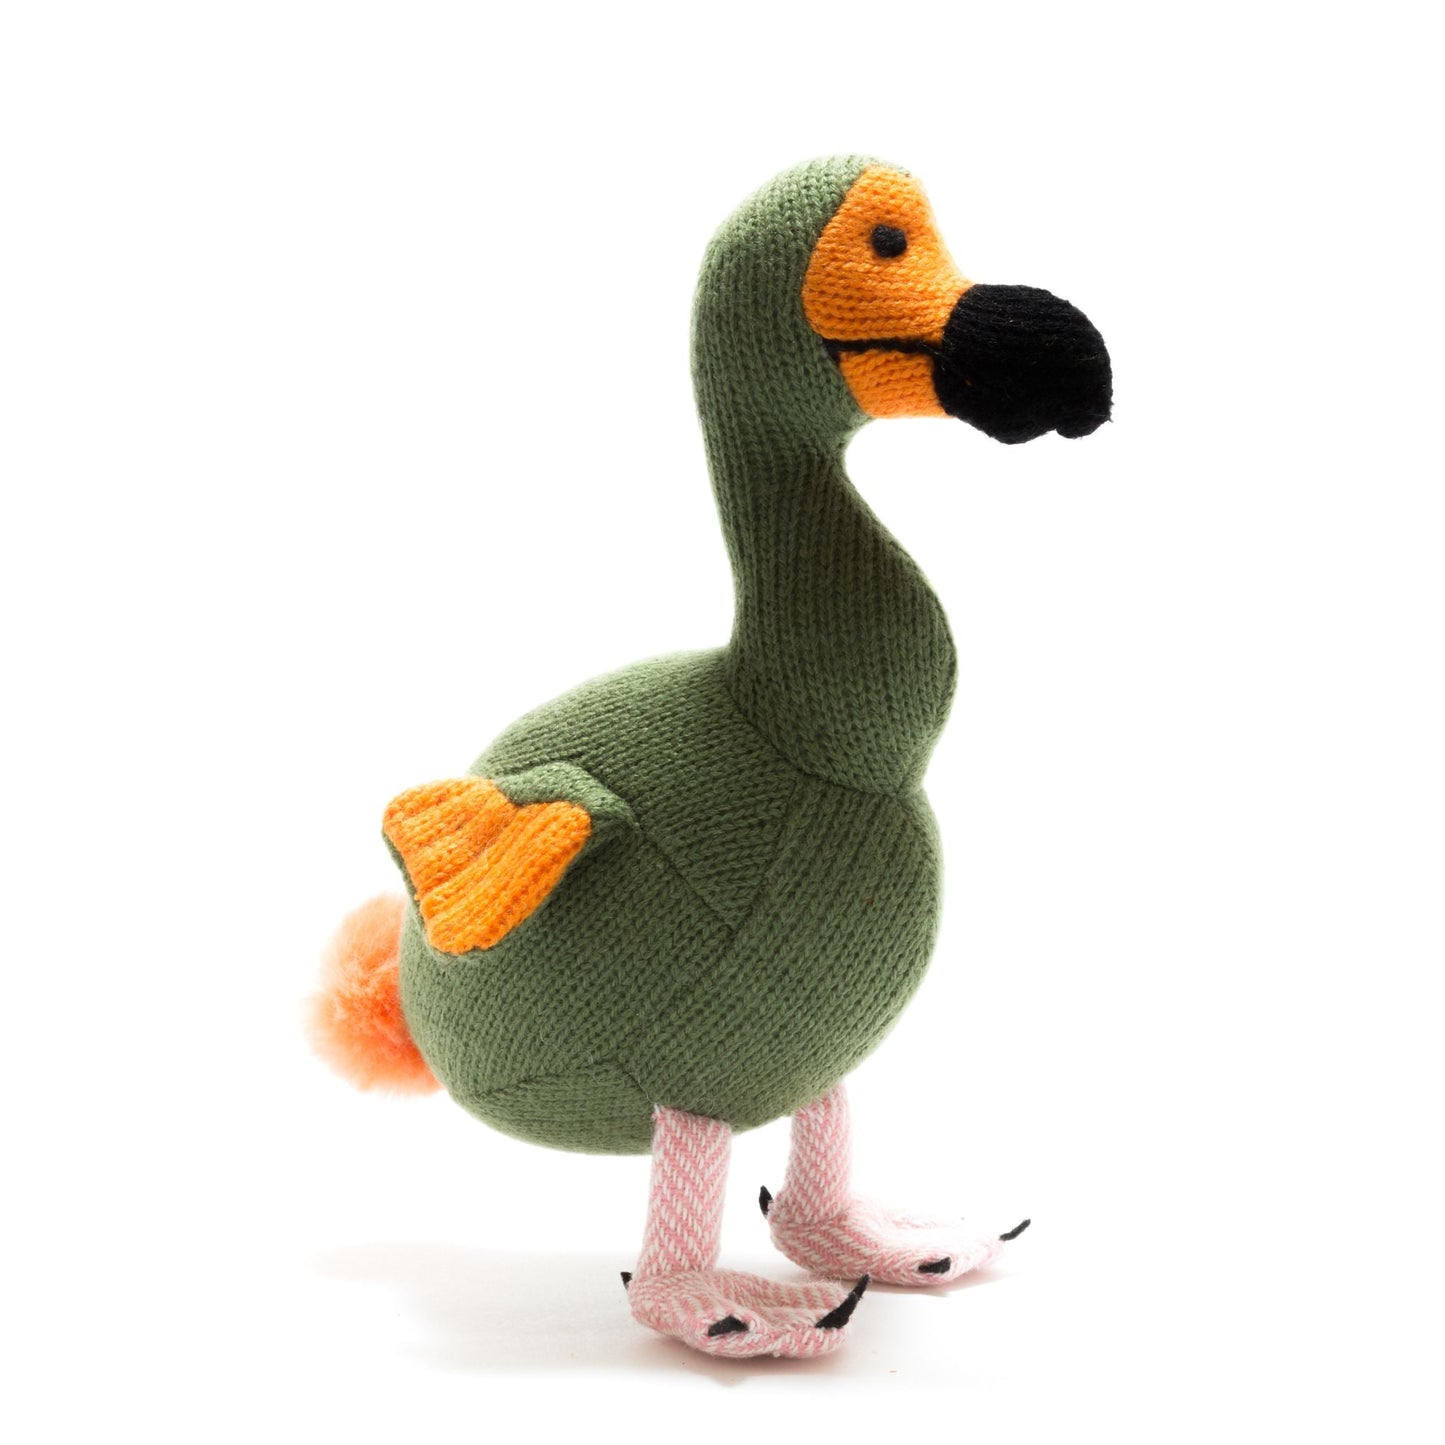 Moss green and orange dodo knitted toy against a white background.